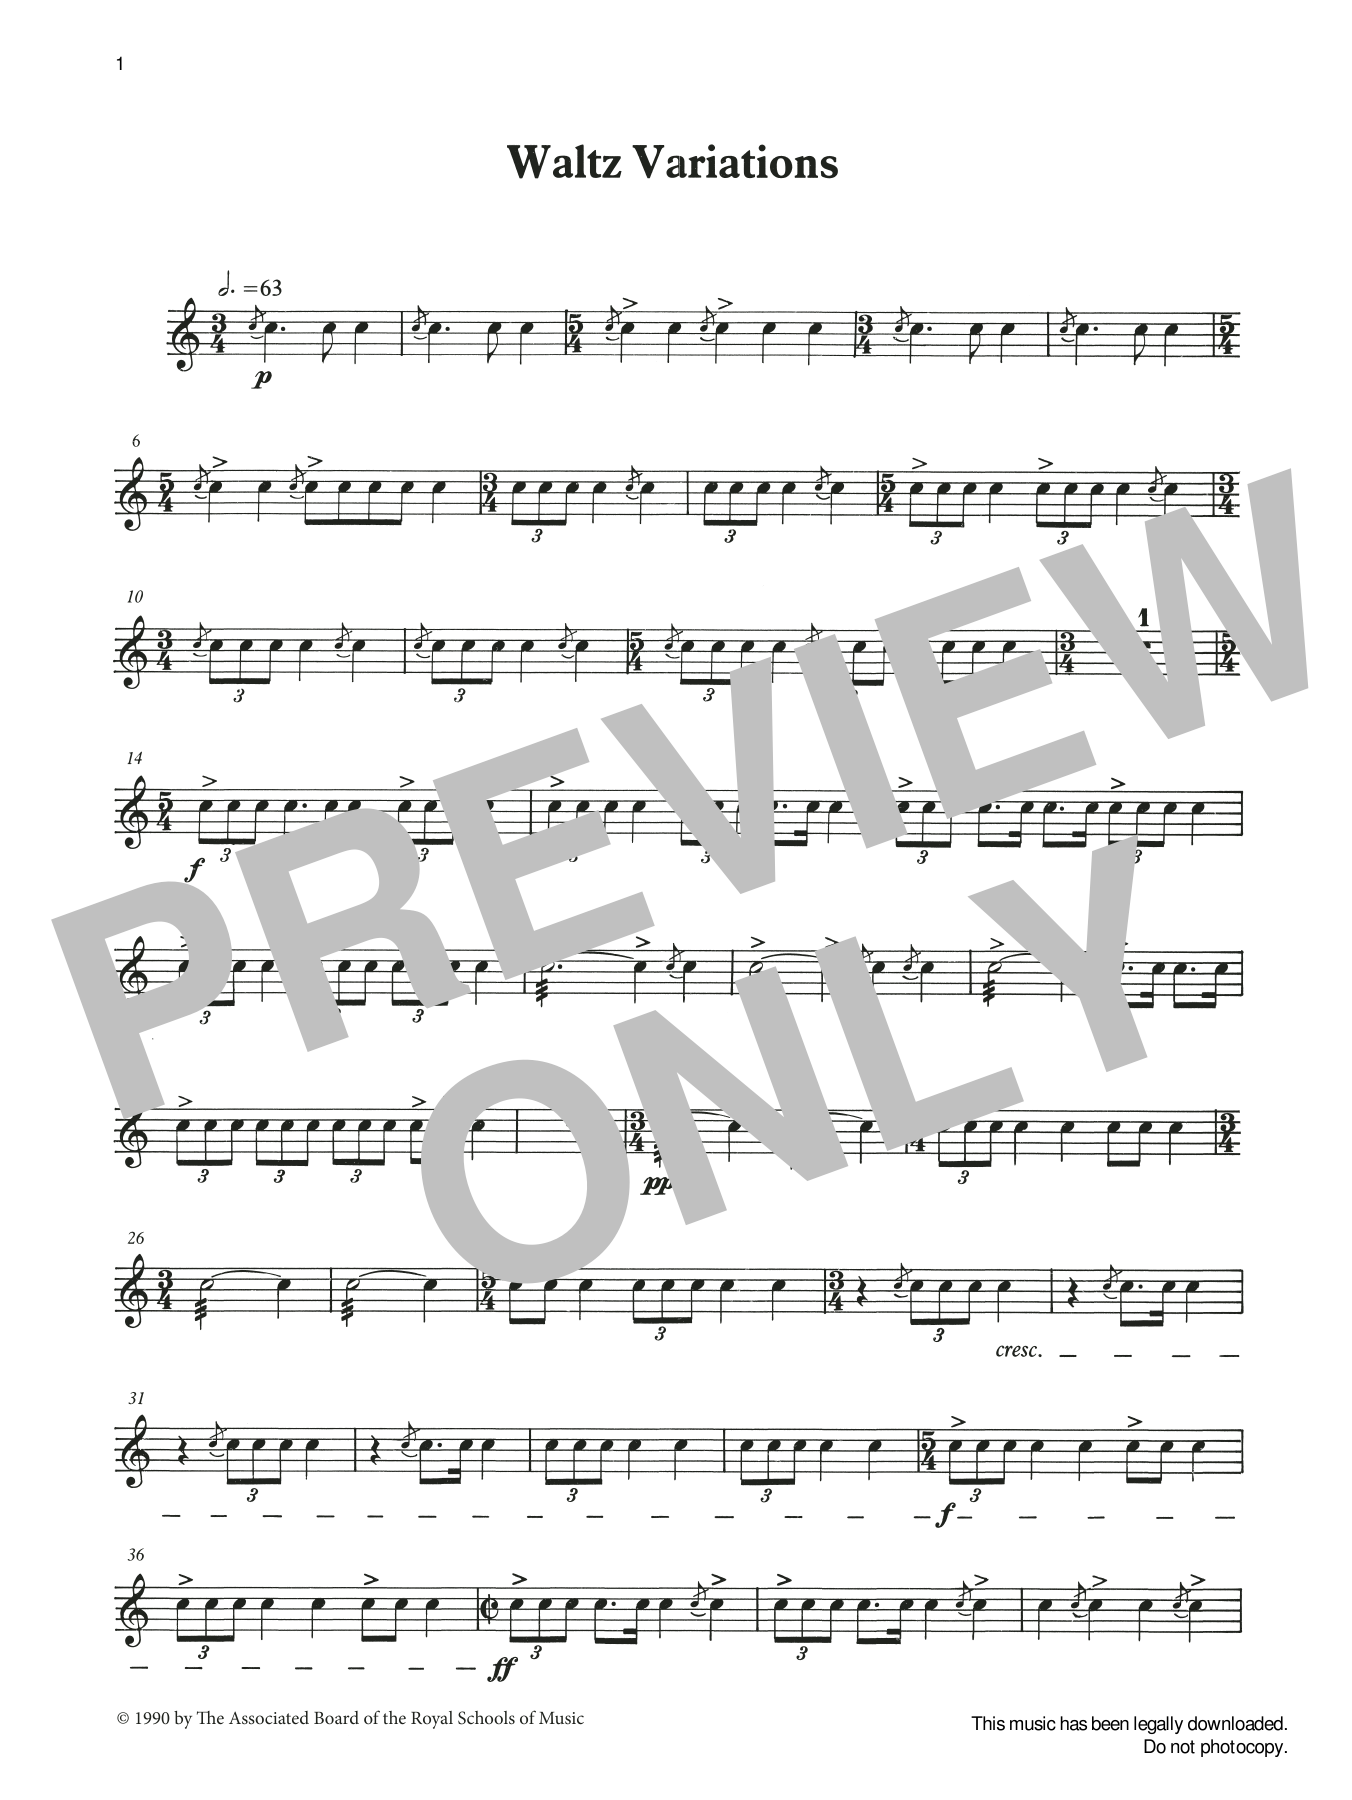 Download Ian Wright and Kevin Hathaway Waltz Variations from Graded Music for Sheet Music